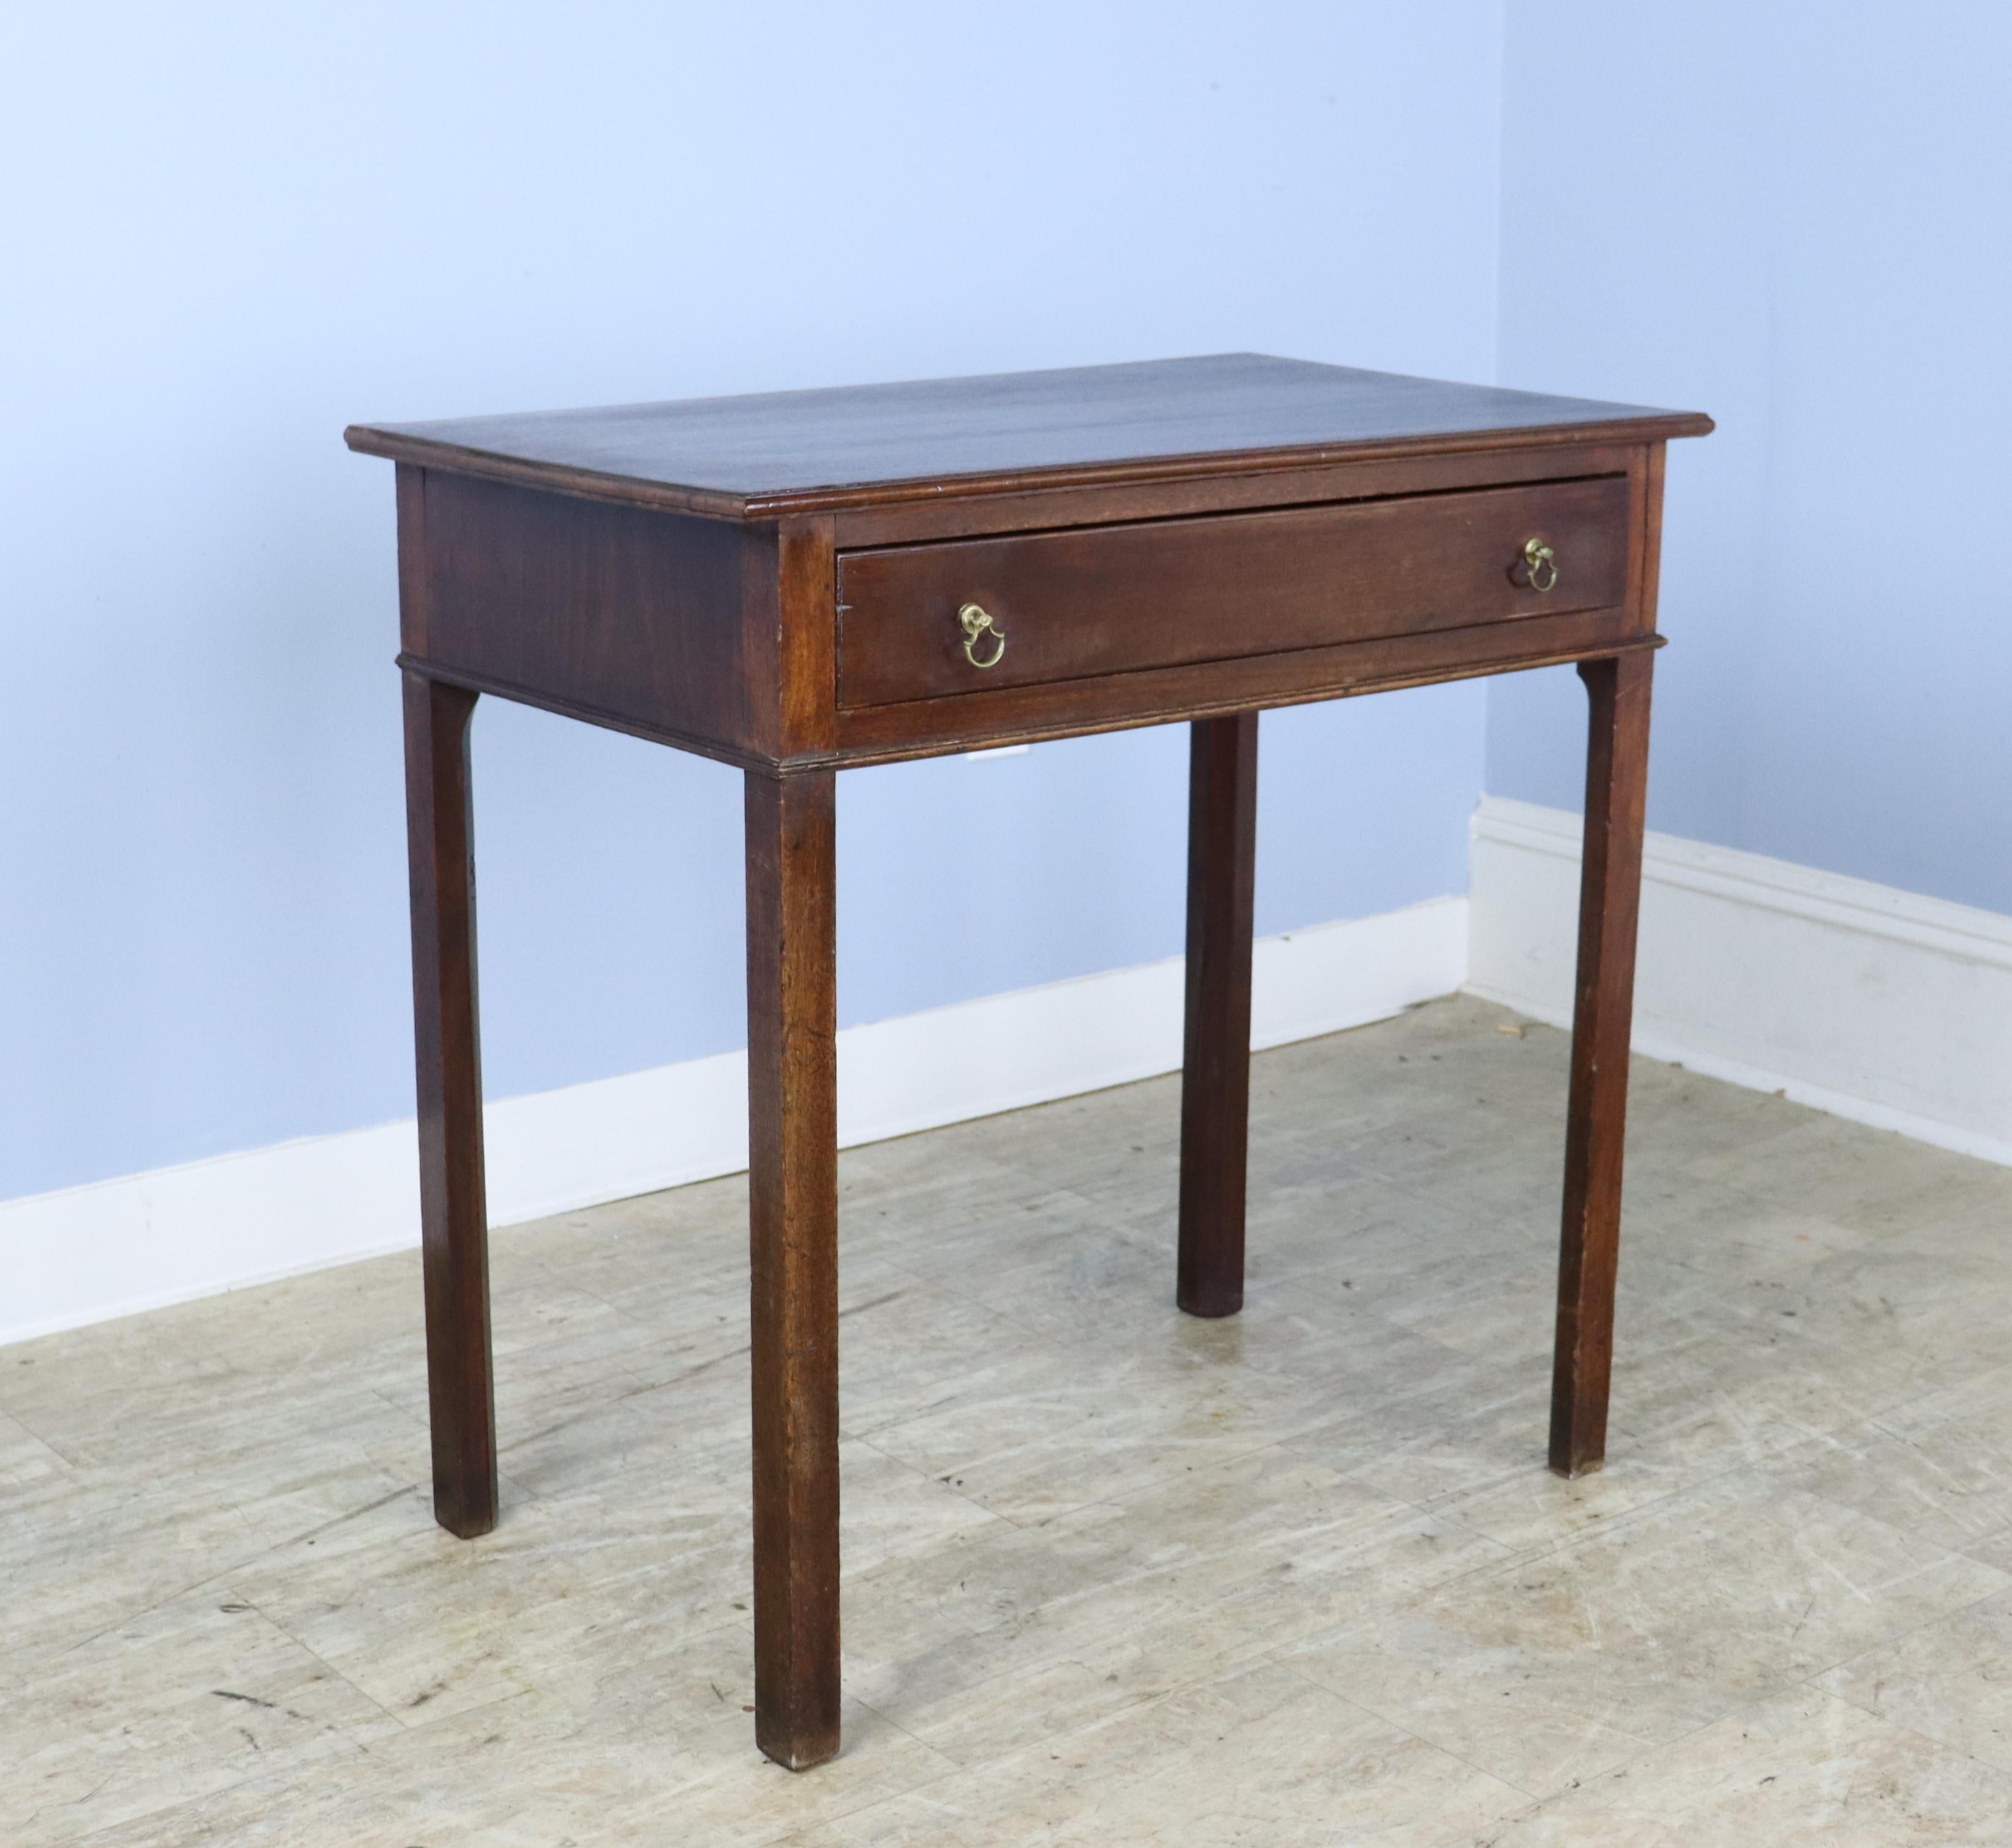 An antique occasional table from England. Classic Georgian shape. Mahogany with a rich grain and patina. One wide drawer with classic brass handles under carved edge. Would make a suitable lamp table. Top has been lightly refinished. but some slight